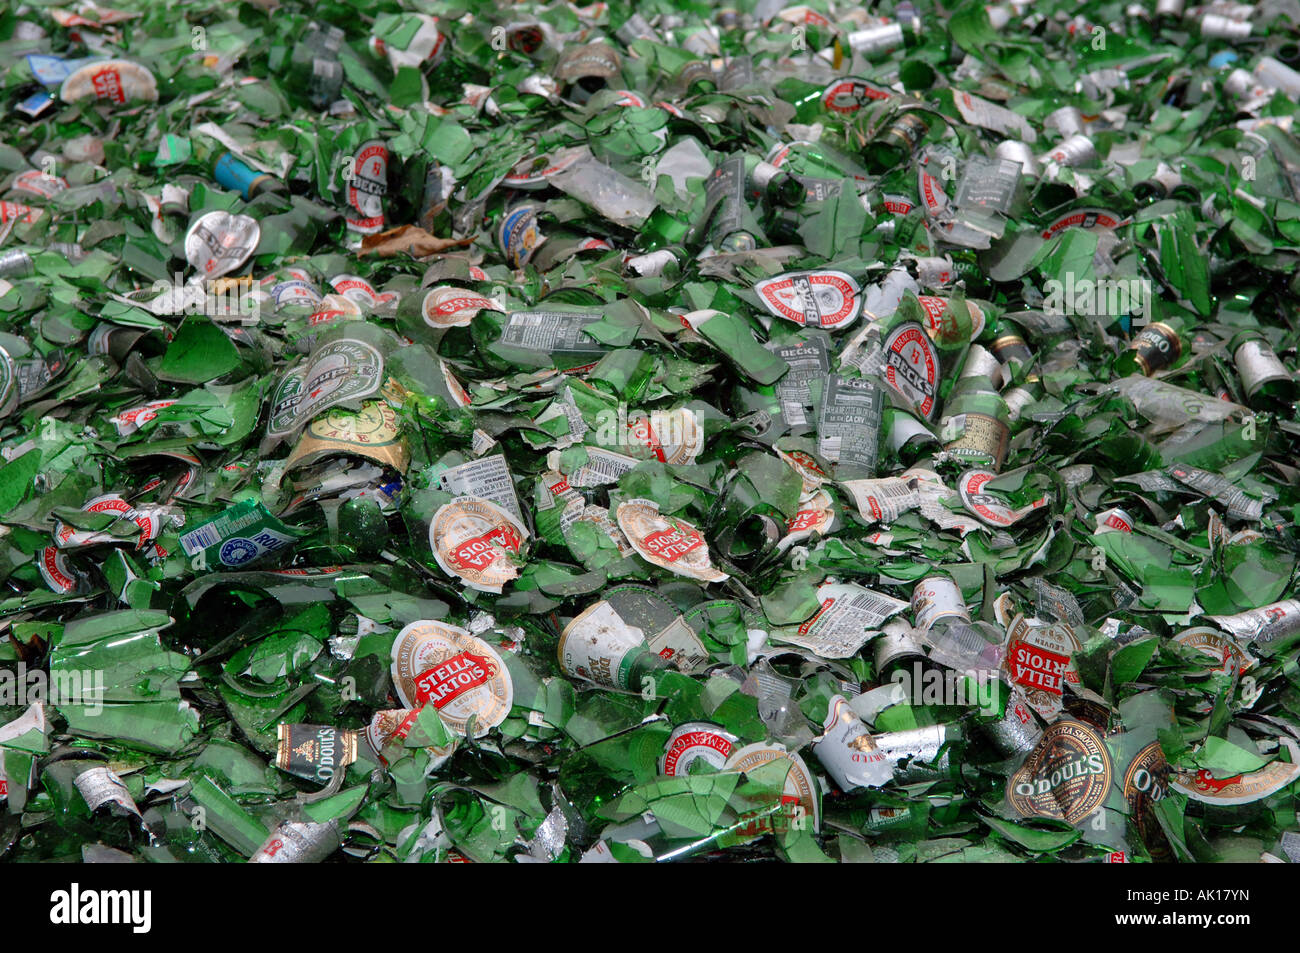 Green glass recyclable material at recycling plant Stock Photo